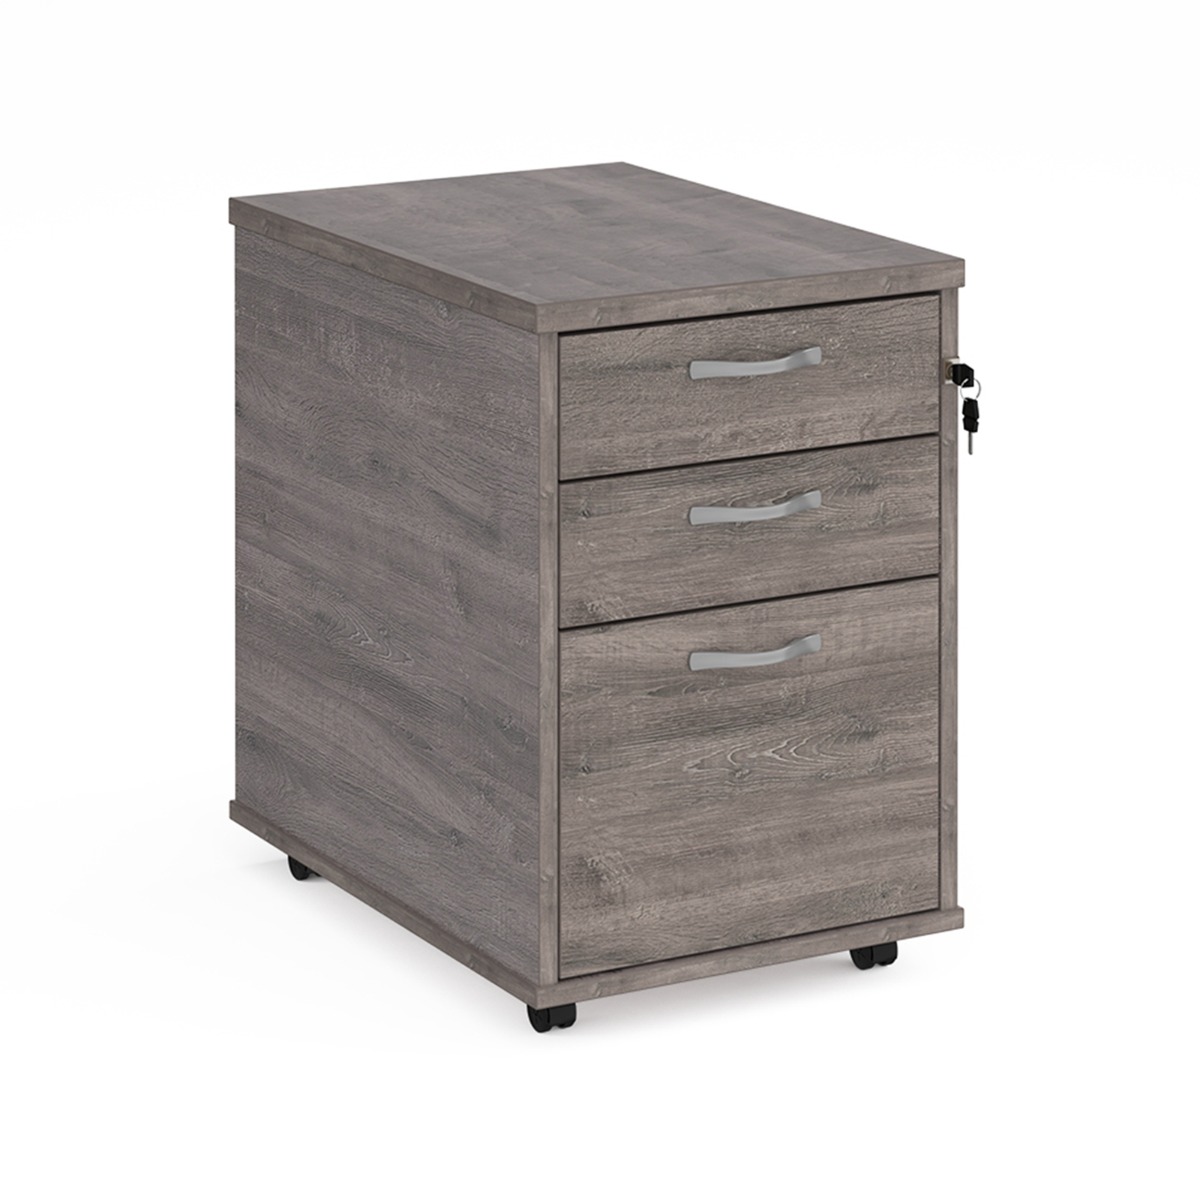 Tall Mobile 3 Drawer Pedestal with Silver Handles 600mm Deep – Grey Oak